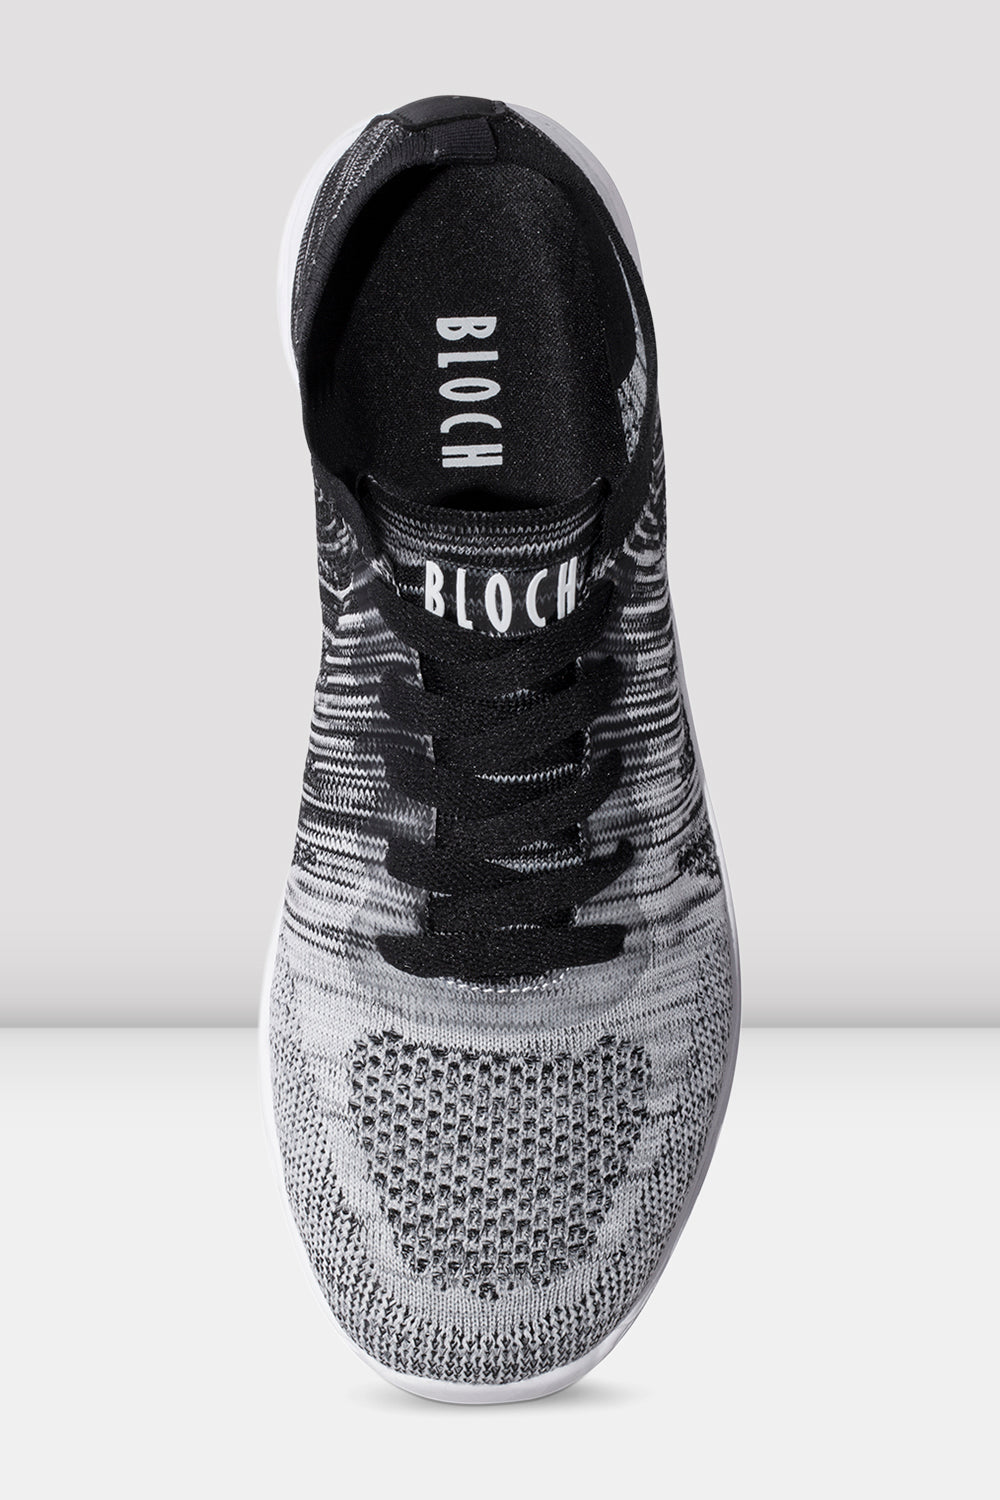 bloch trainers